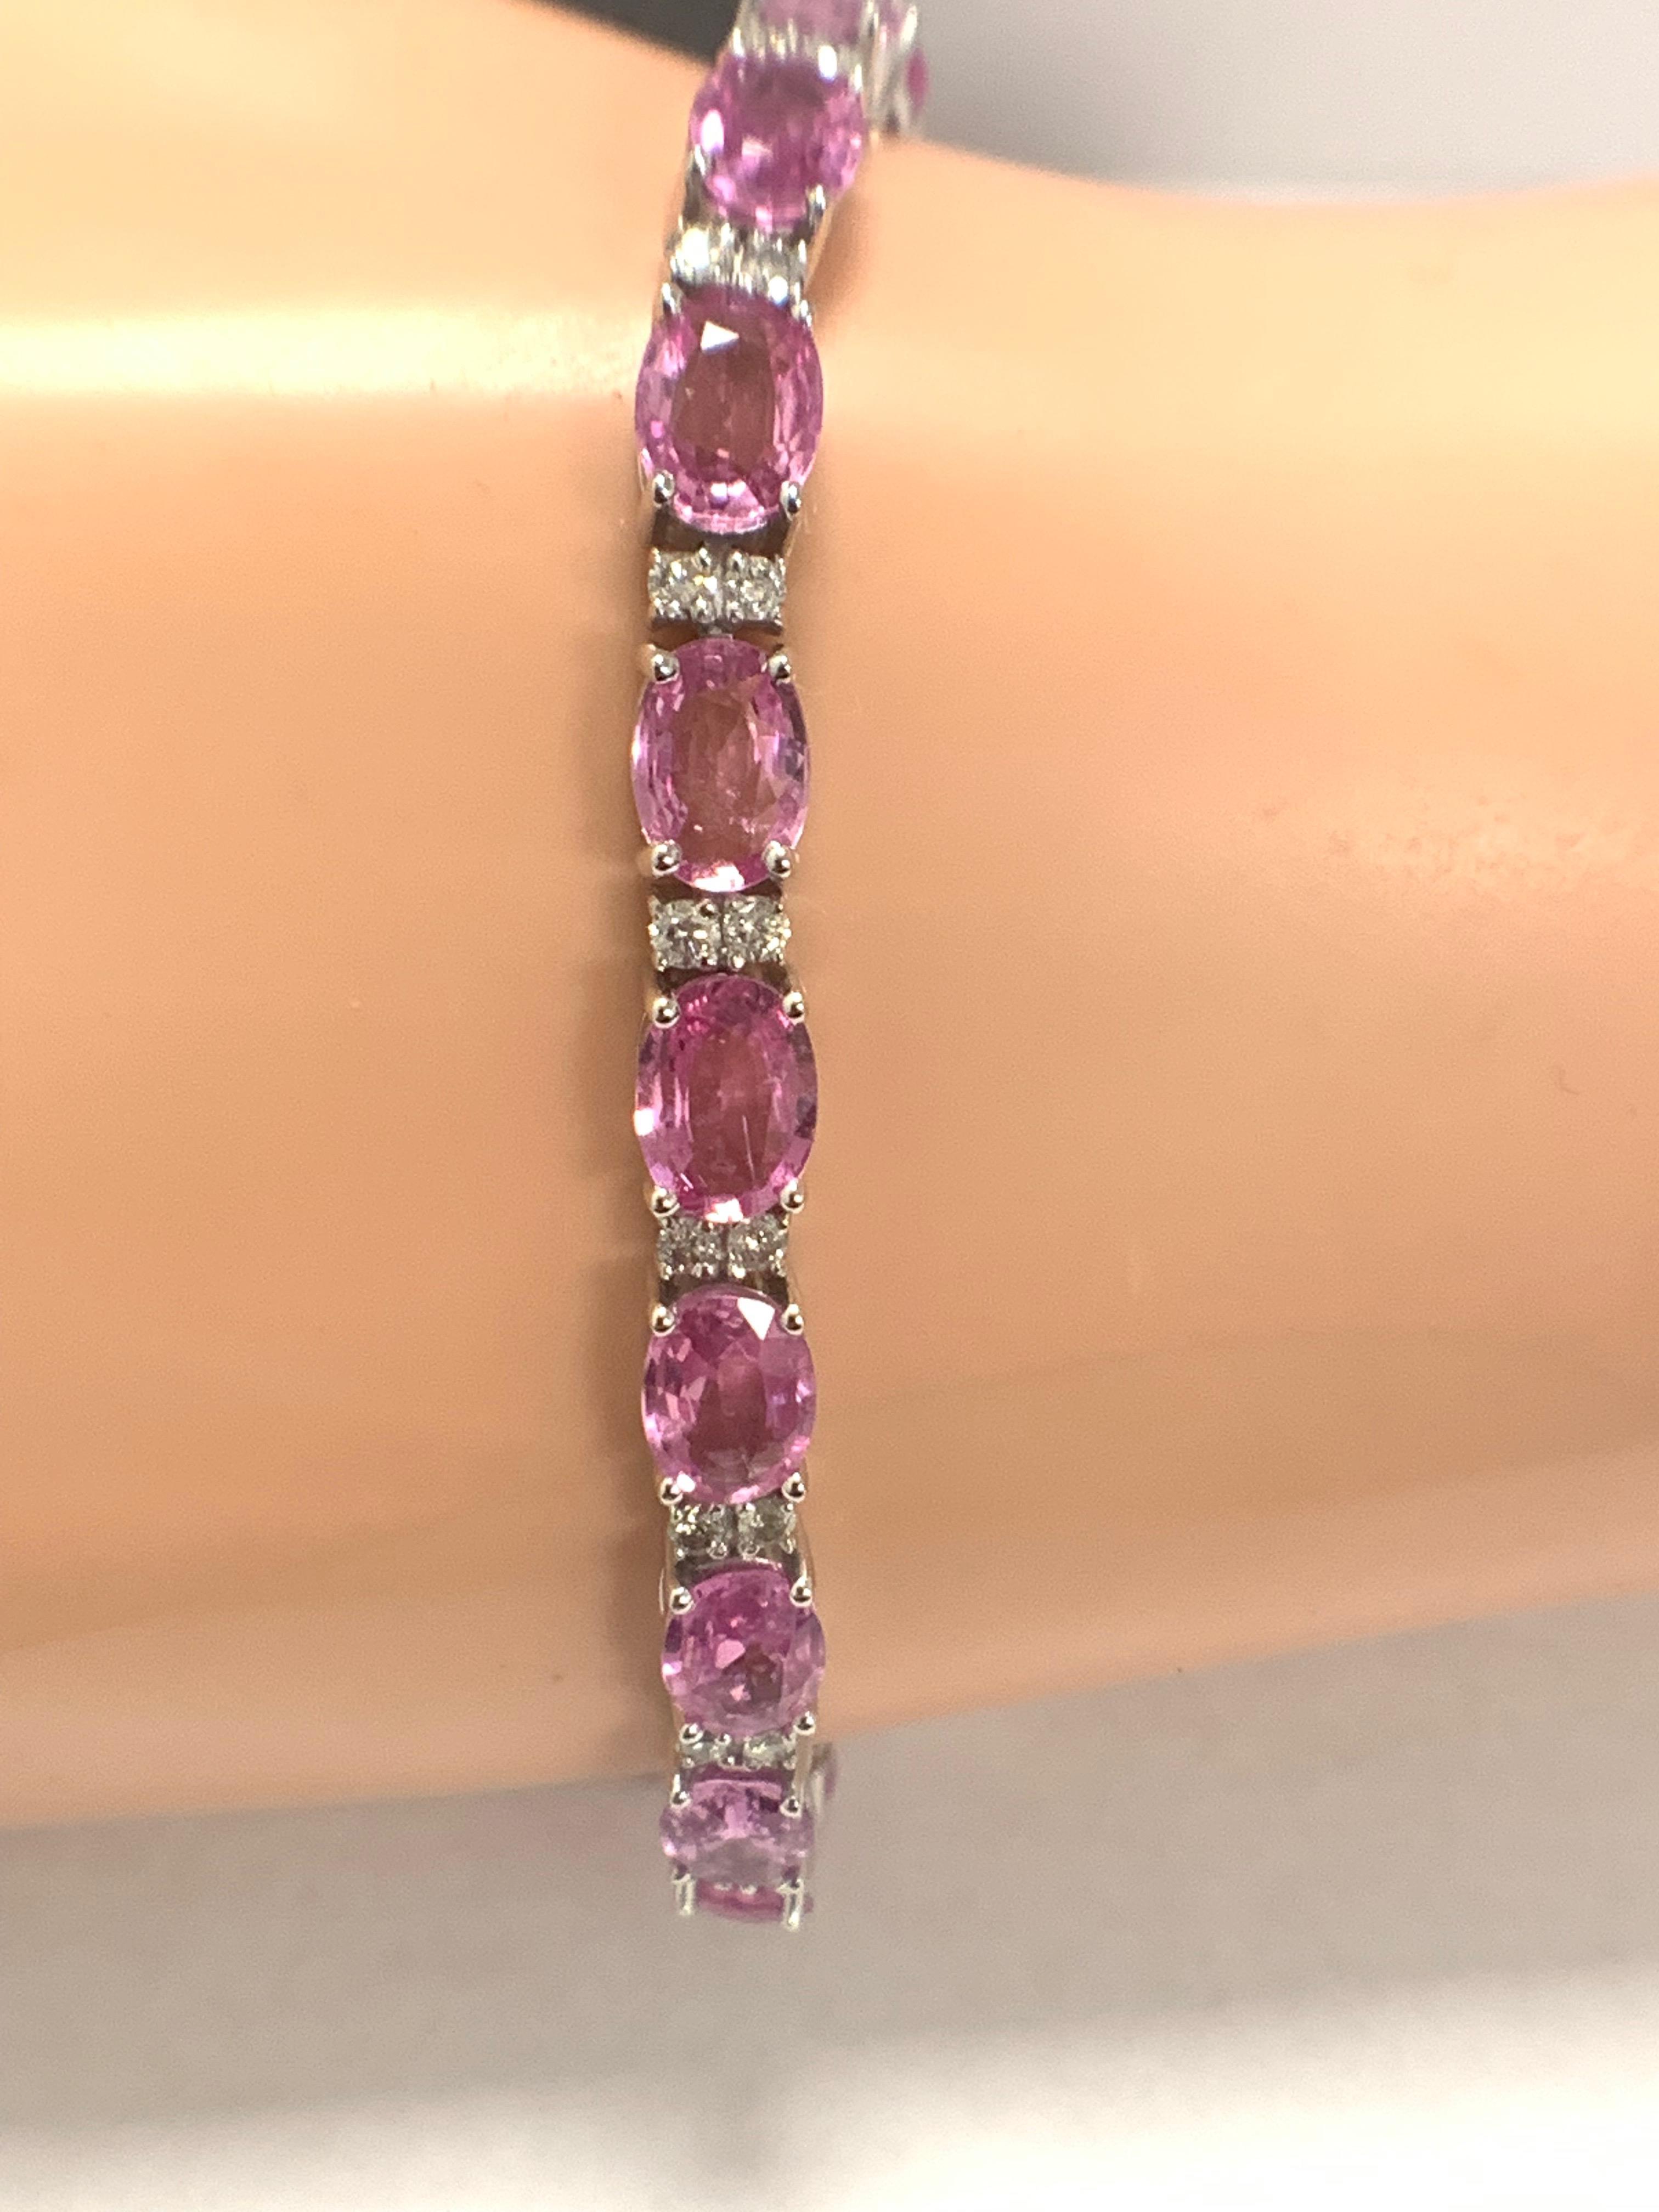 14ct White Gold Sapphire and Diamond bracelet featuring, 19 oval cut, pink Sapphires (15.93ct TSW) - Image 9 of 11